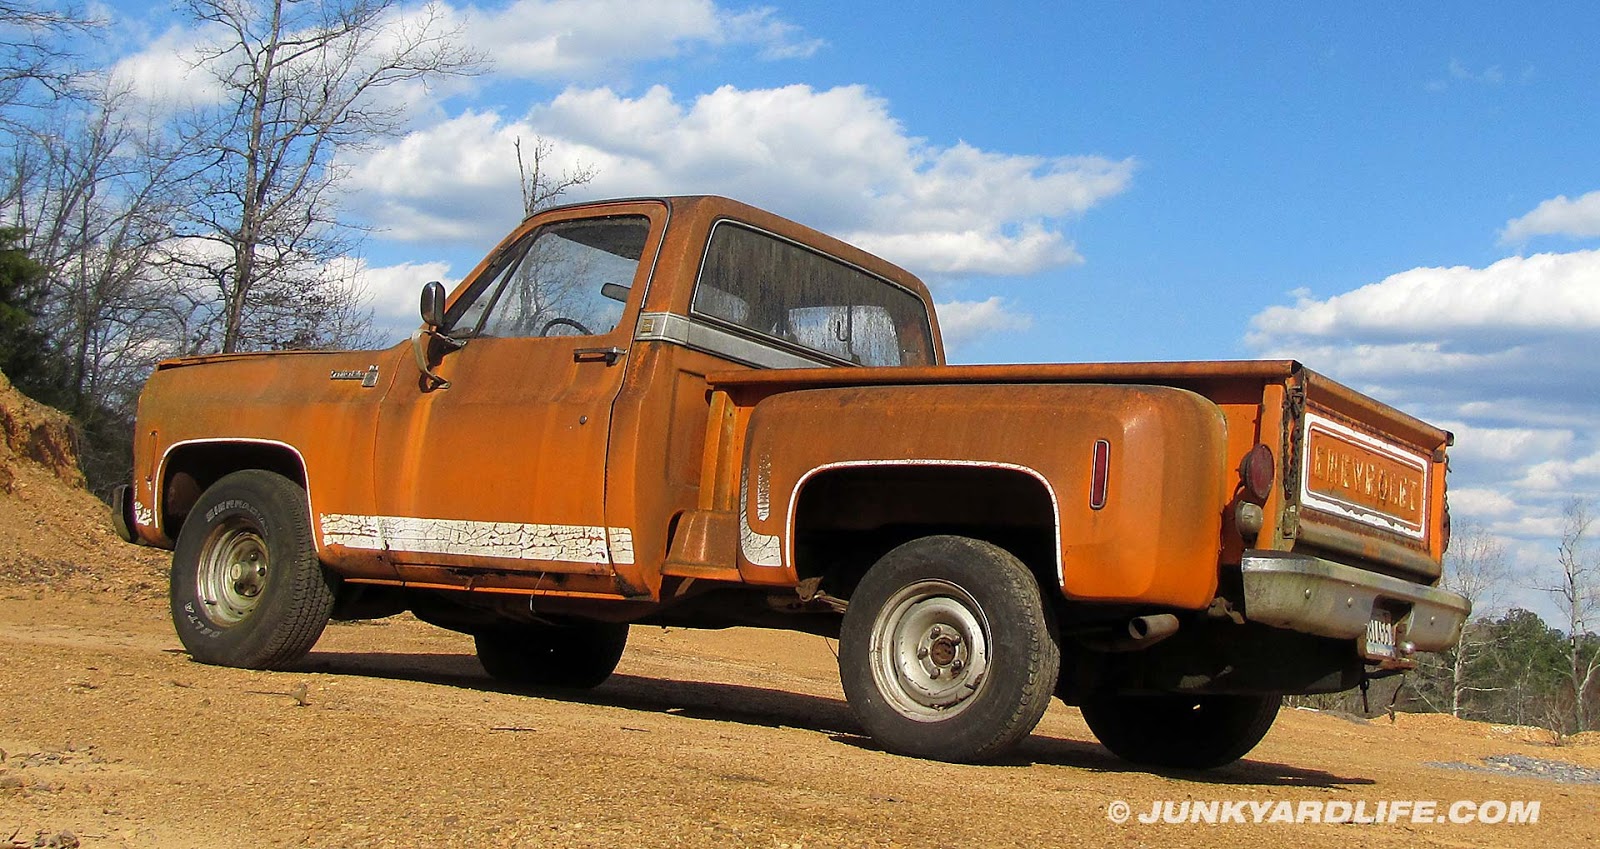 Junkyard Life: Classic Cars, Muscle Cars, Barn finds, Hot rods and part ...